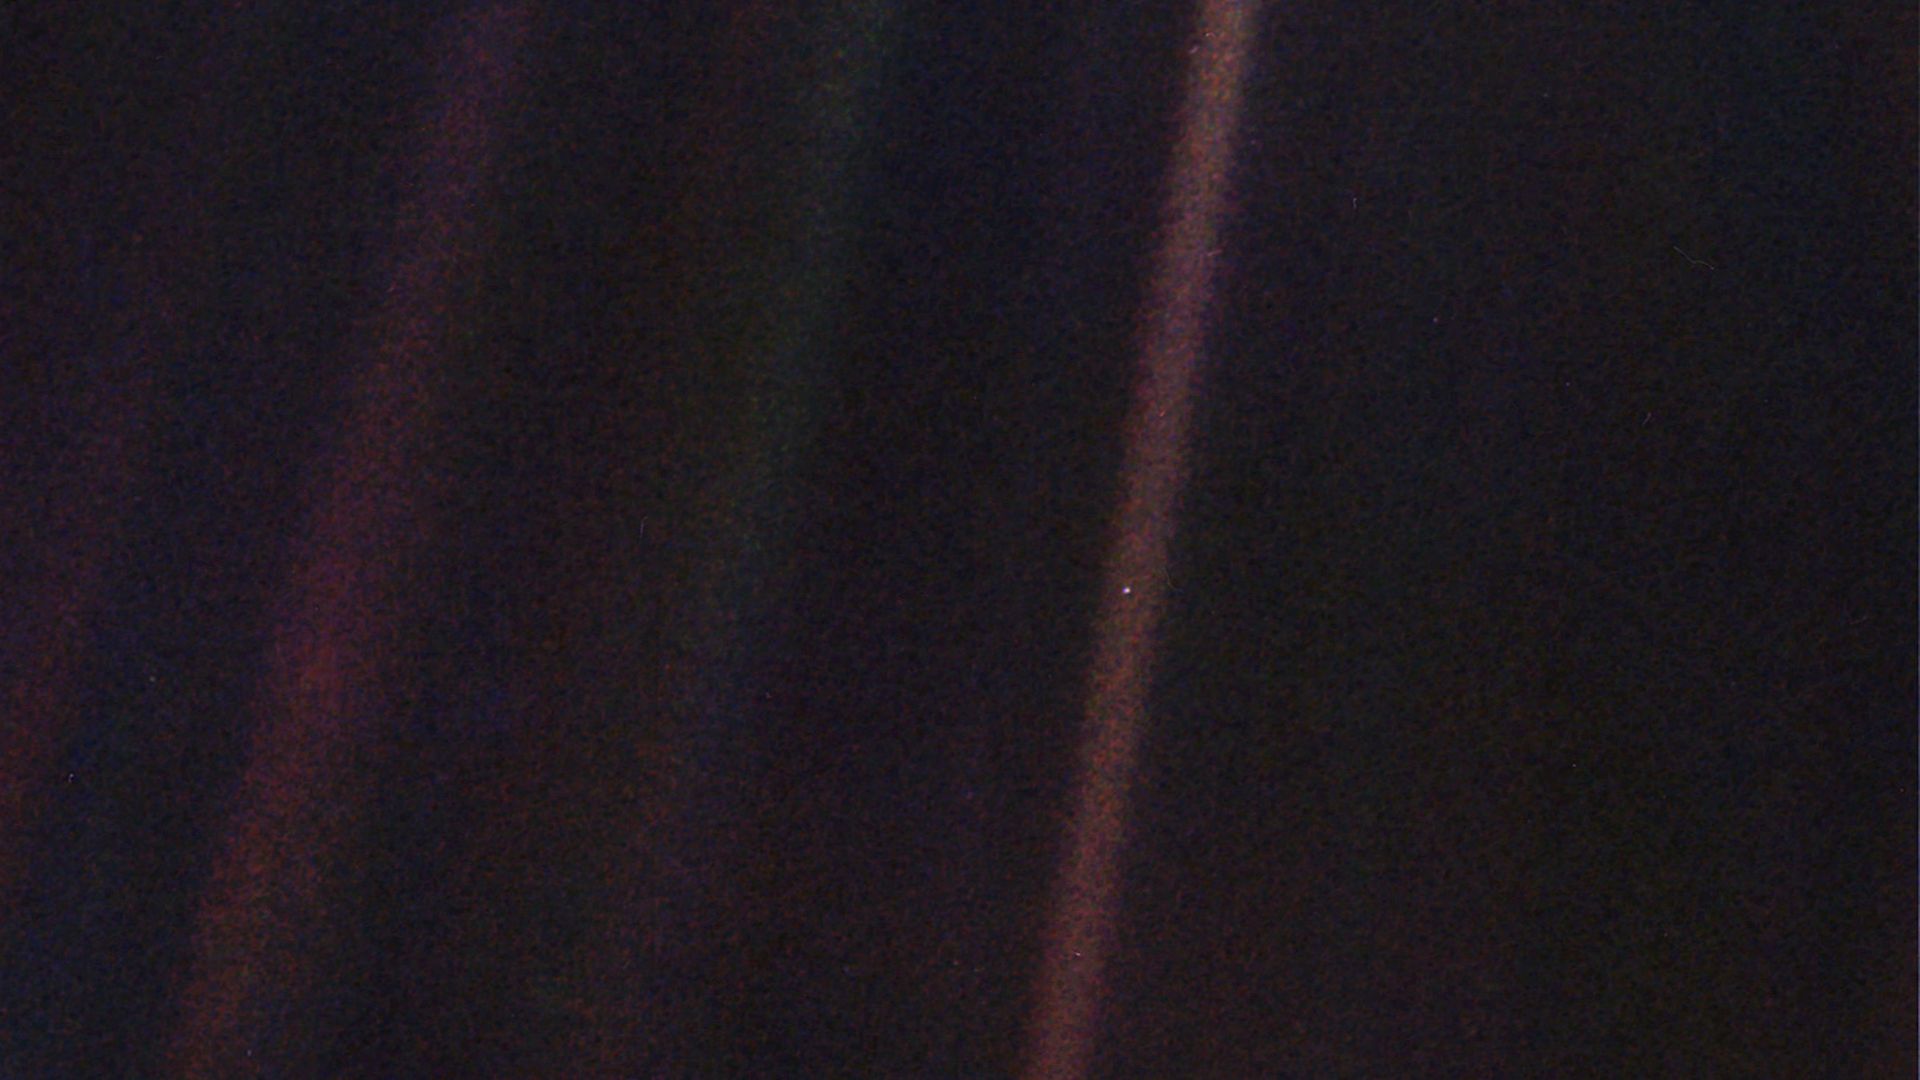 The Voyager 1 photo showing Earth from a distance of more than 4 billion miles.